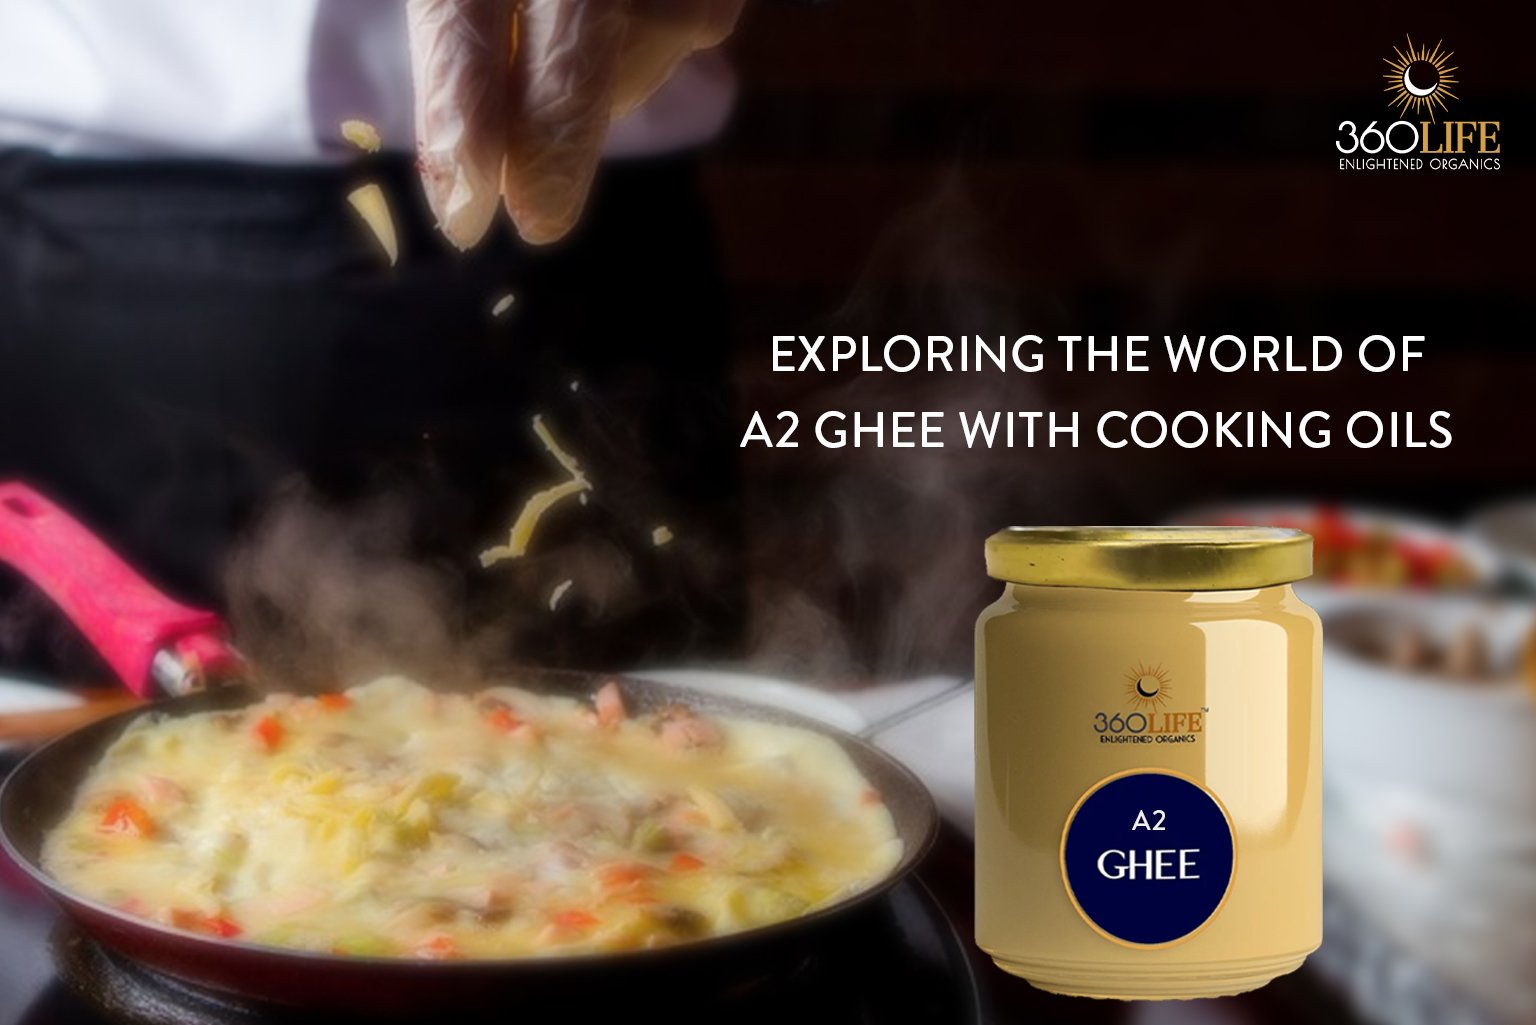 Exploring the World of A2 Ghee With Cooking Oils